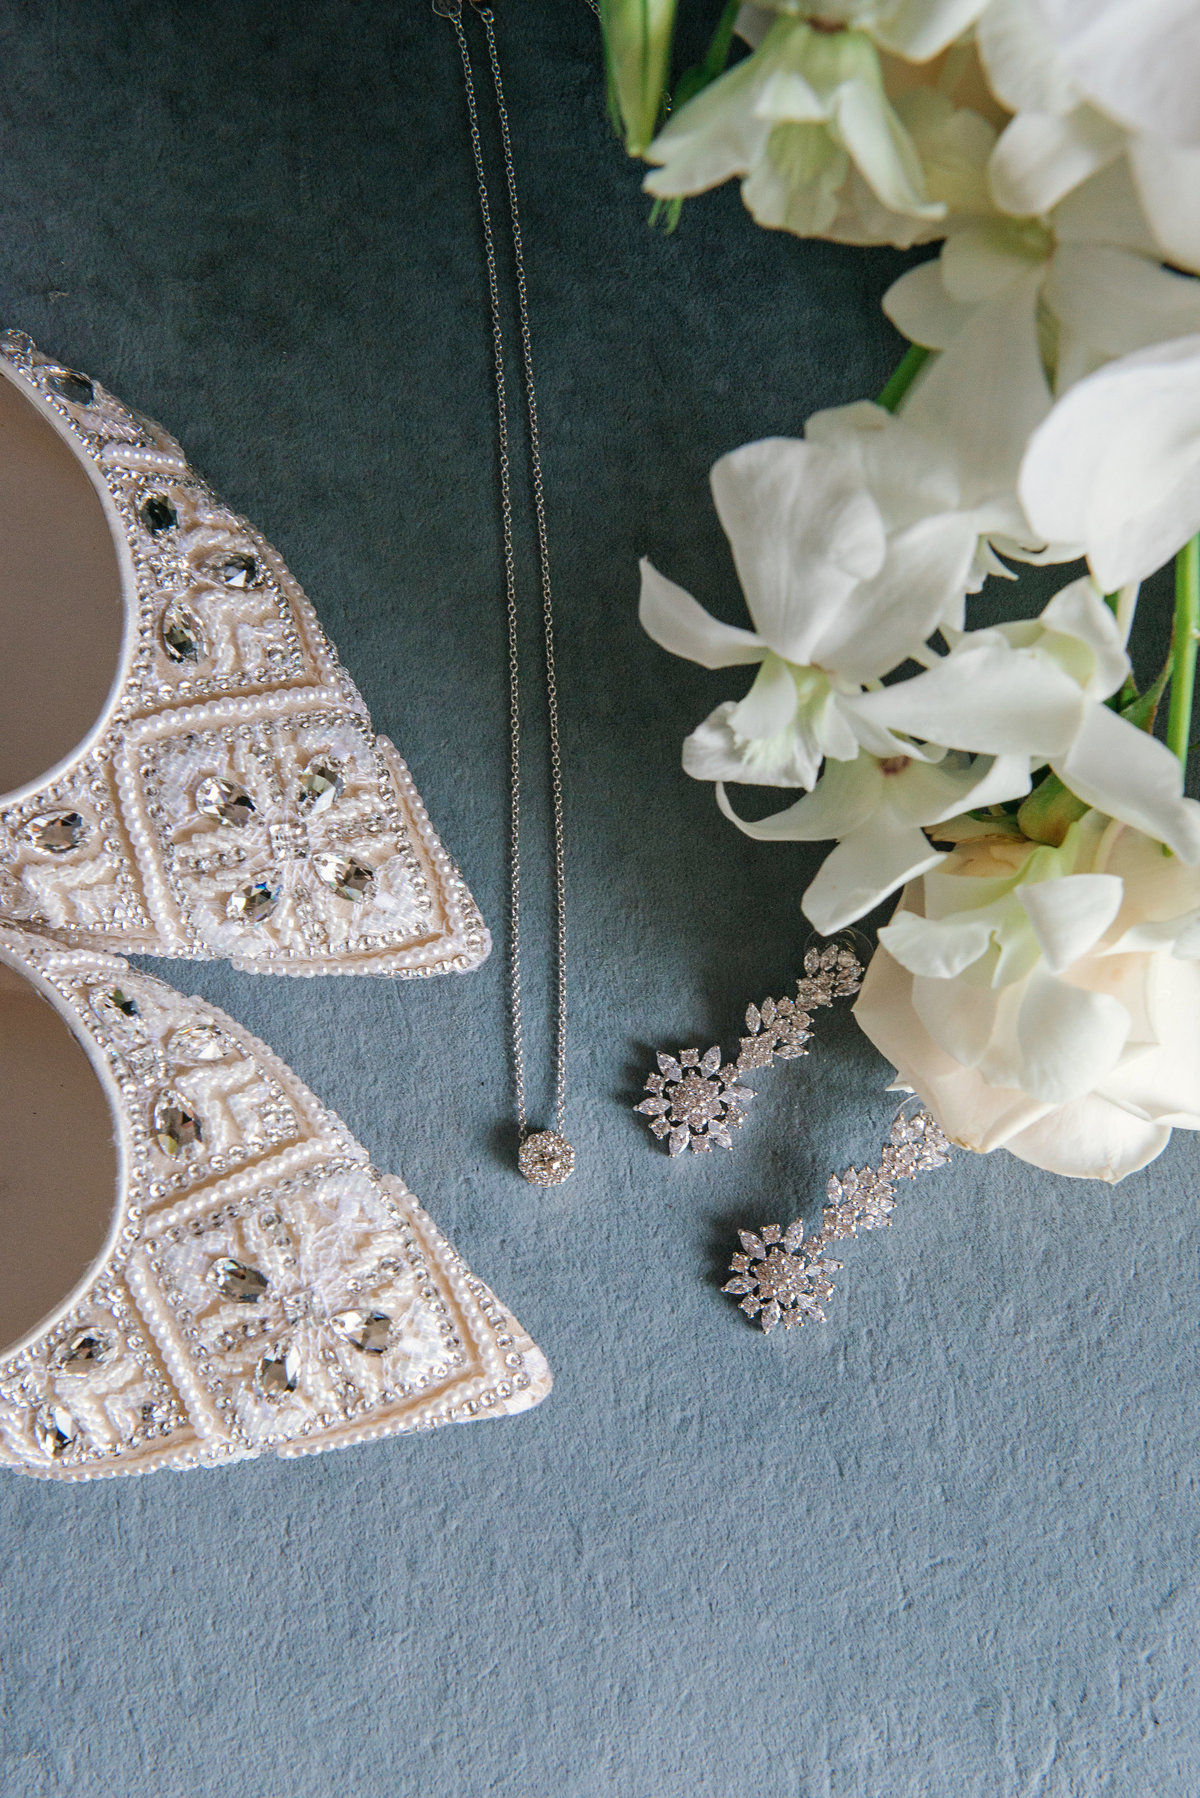 photo of bridal shoes and jewelry for wedding day at The Garden City Hotel